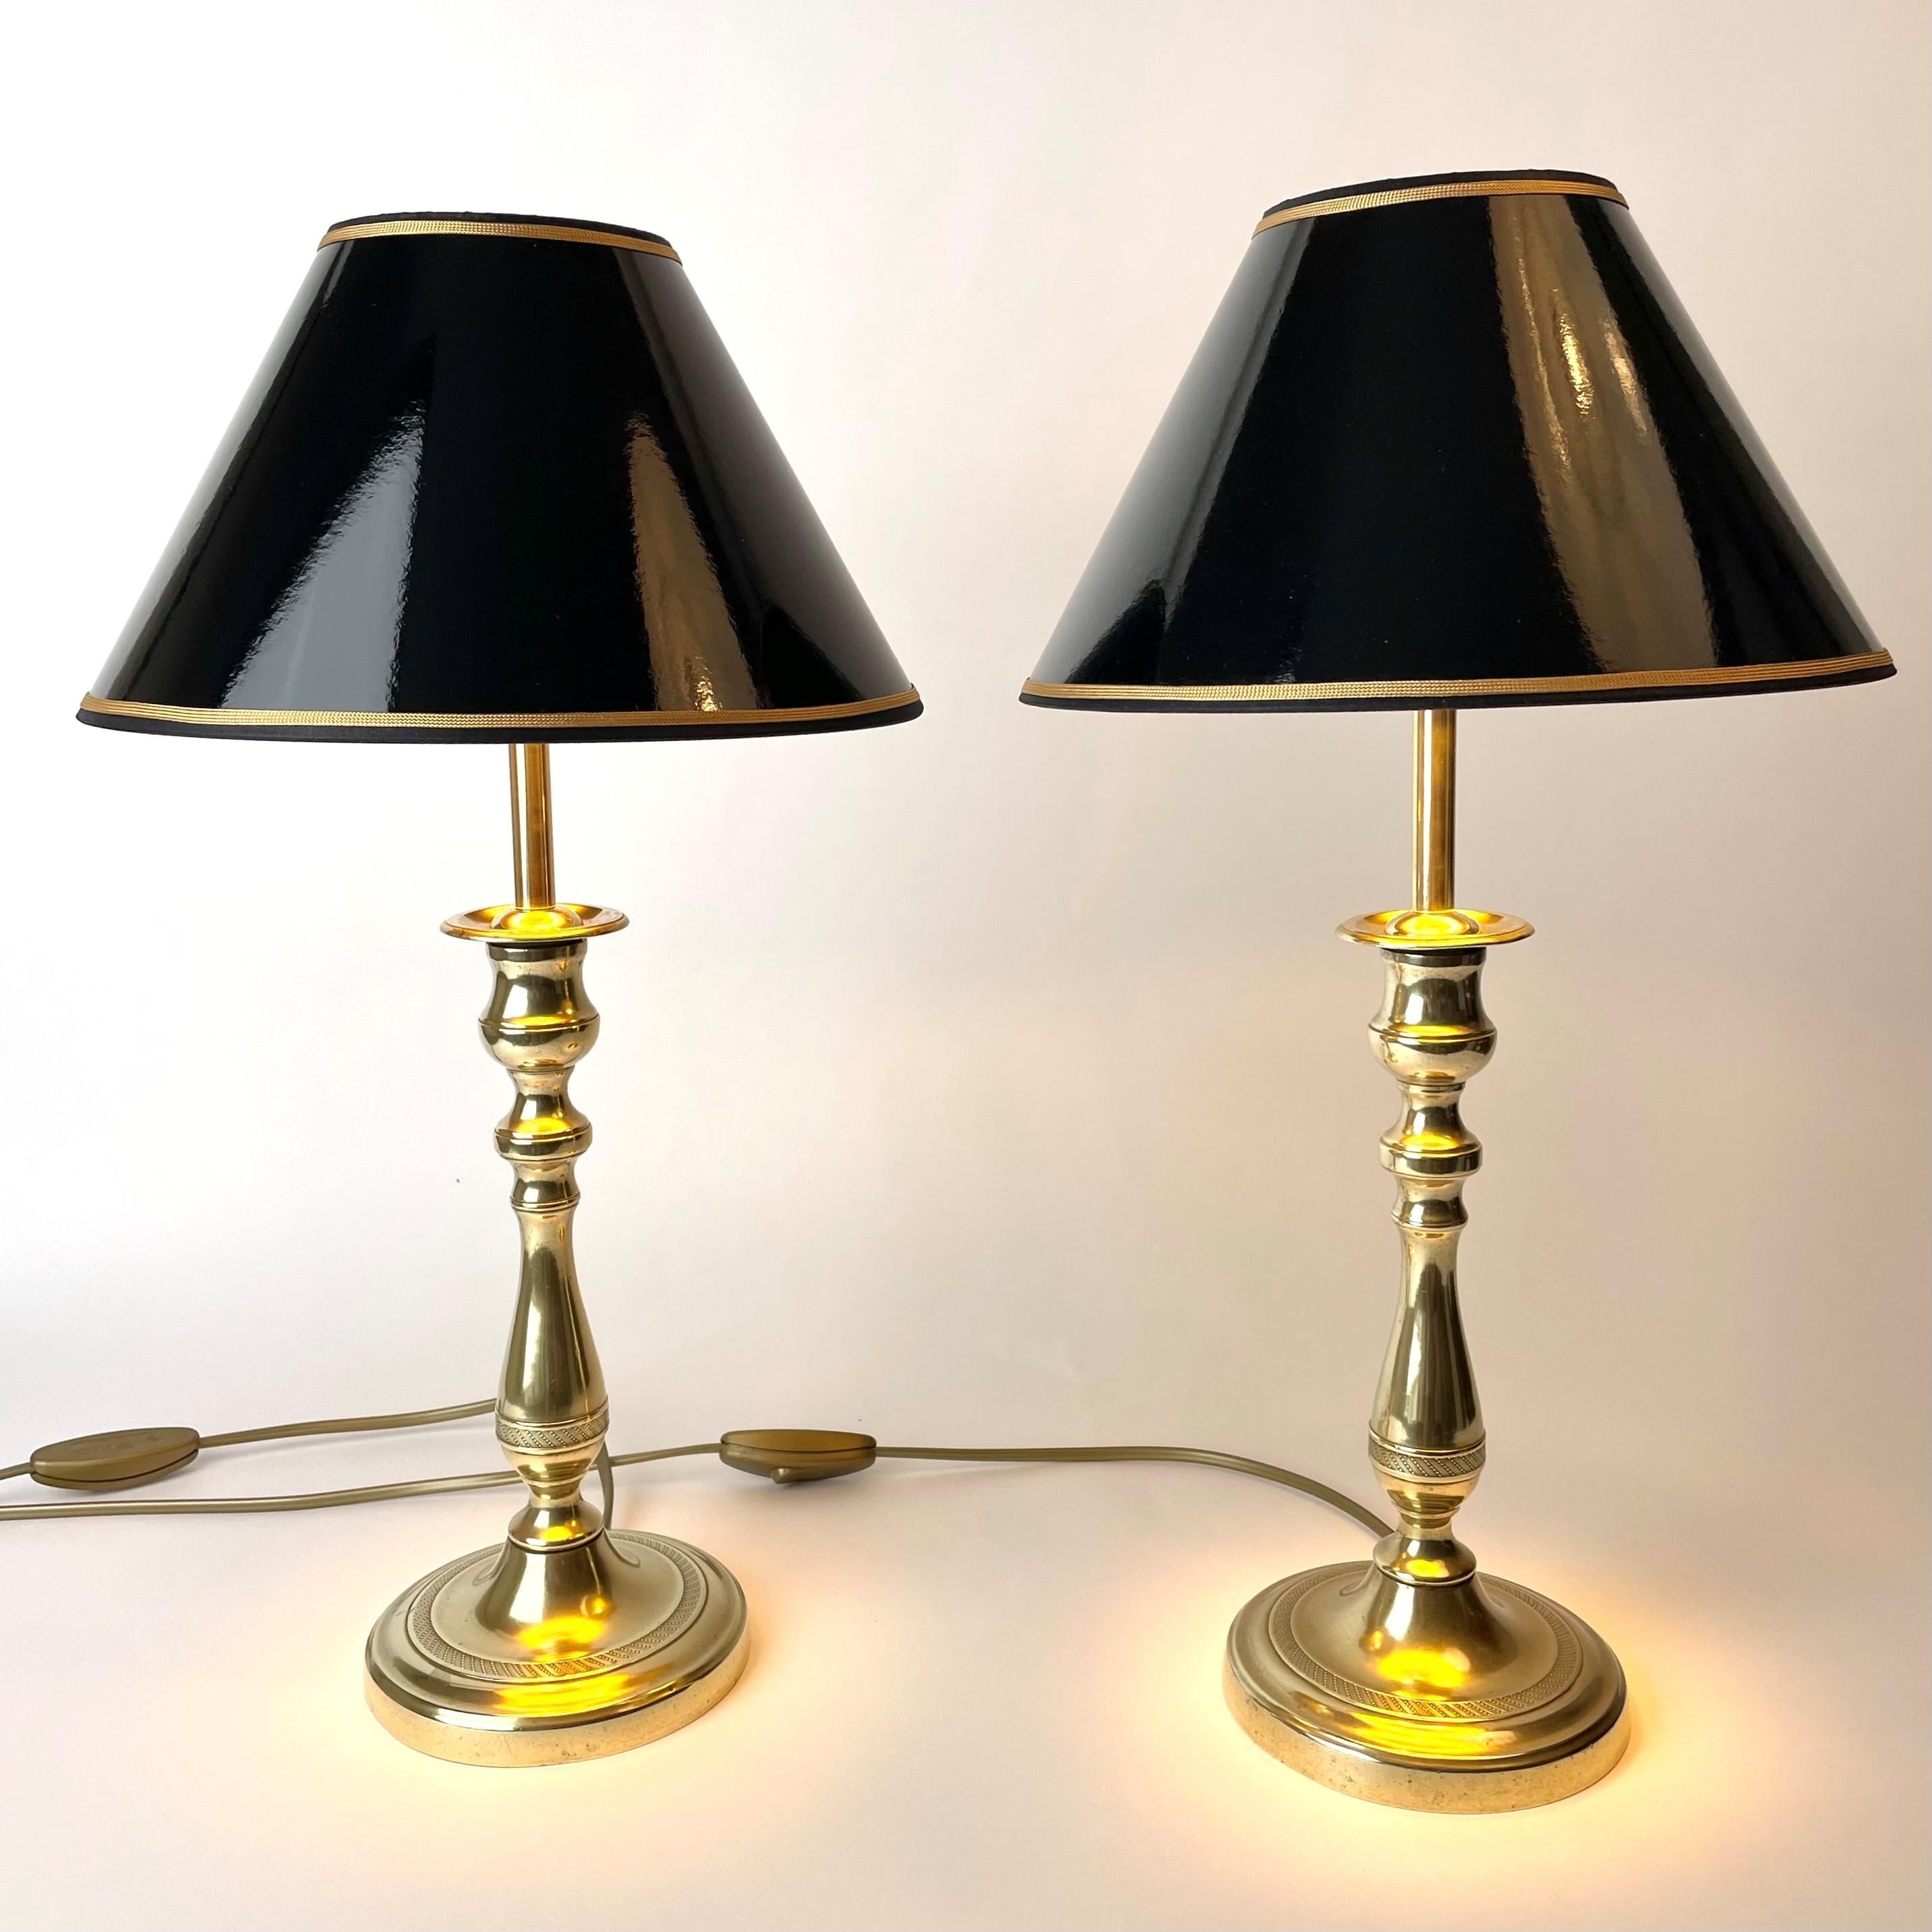 A pair of beautiful Table Lamps, originally Empire (Restauration, circa 1830) candlesticks in brass that have been converted into electric table lamps. New lampshades in black lacquer with gilding on the inside to give a cozy impression.

The